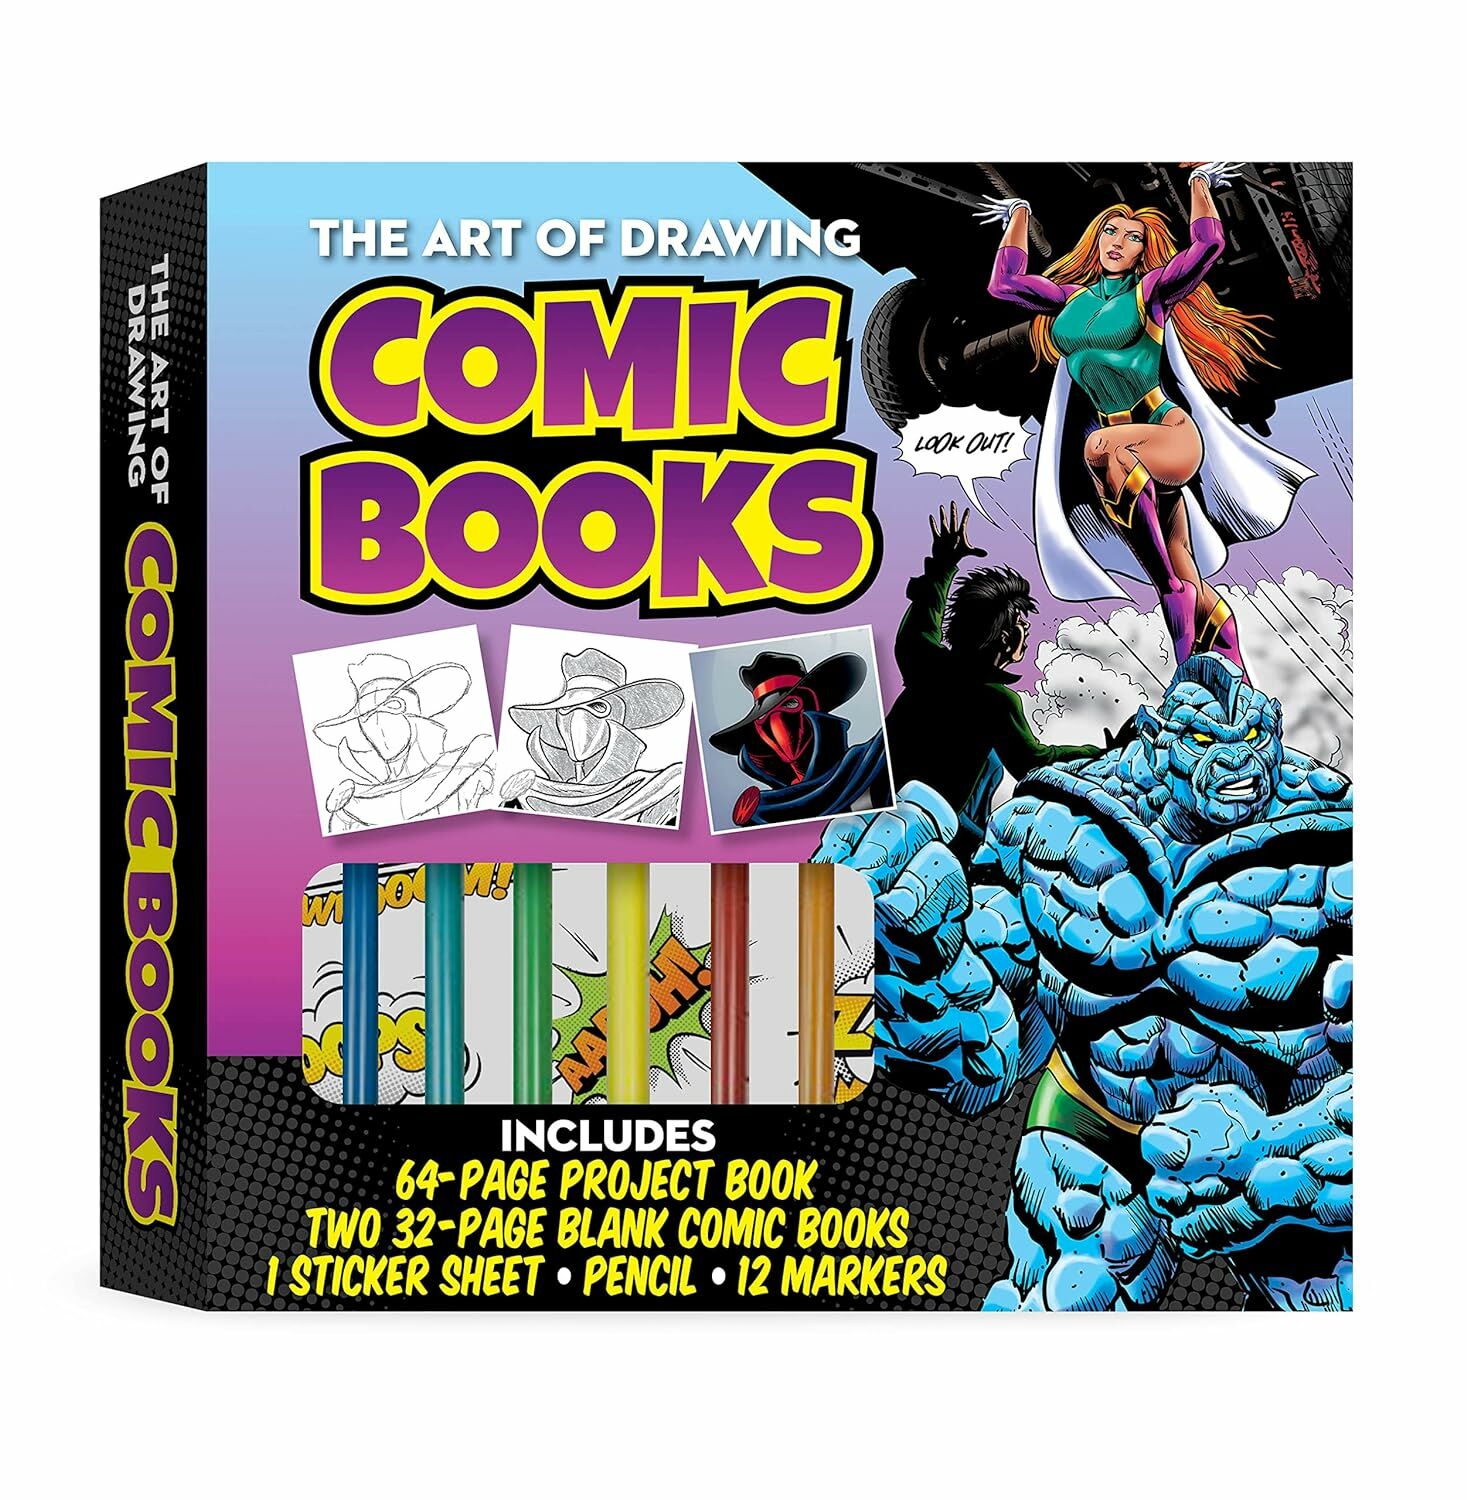 The Art of Drawing Comic Books Kit: Learn to draw comic book characters and create your own comic books